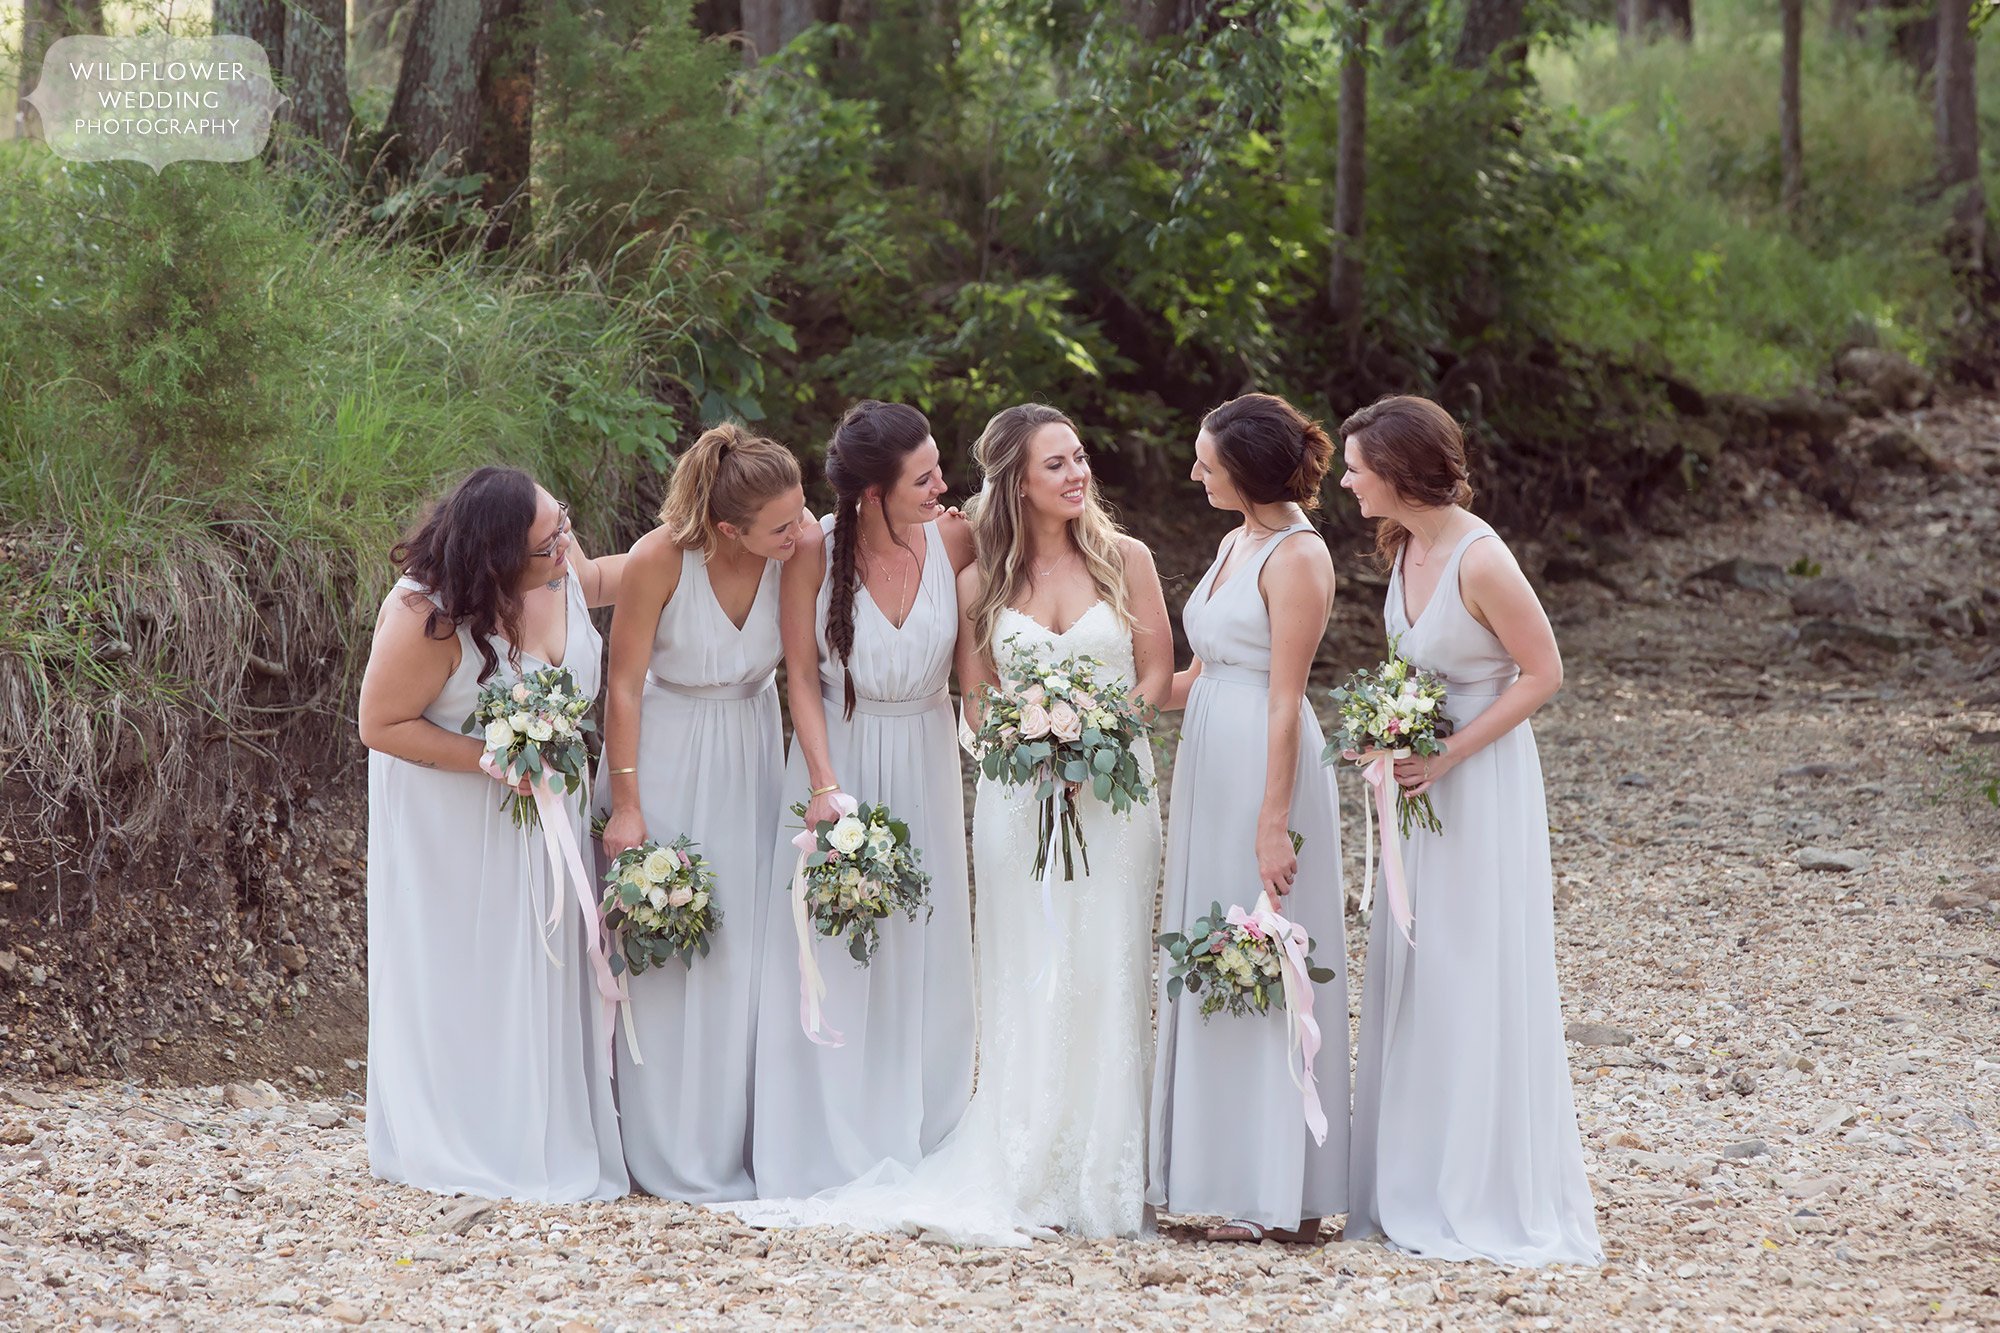 Natural and anthropologie style wedding photography of the bridesmaids at Kempker's Back 40.